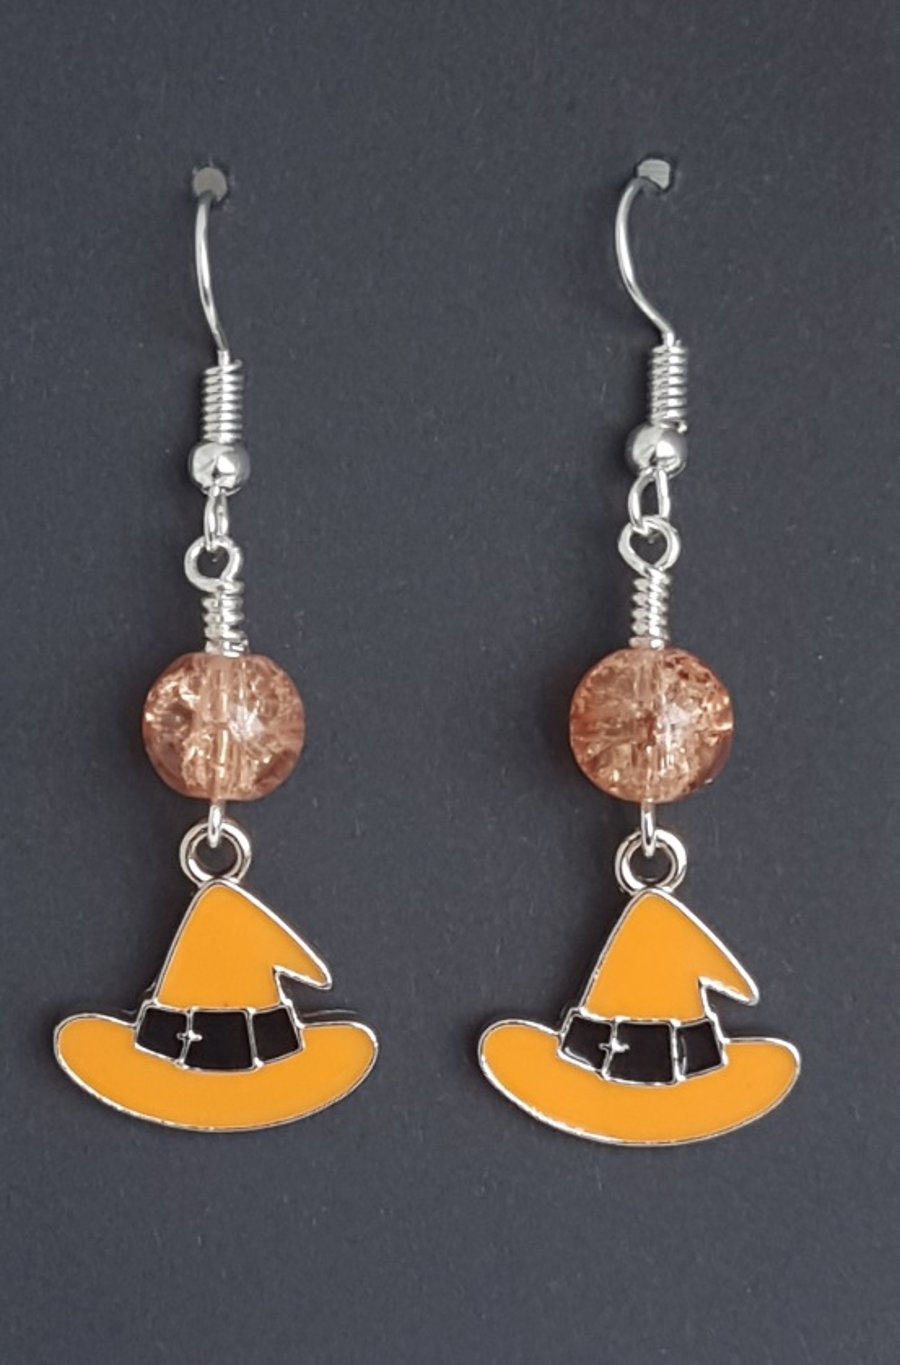 Gorgeous Orange Witches Hat Earrings.